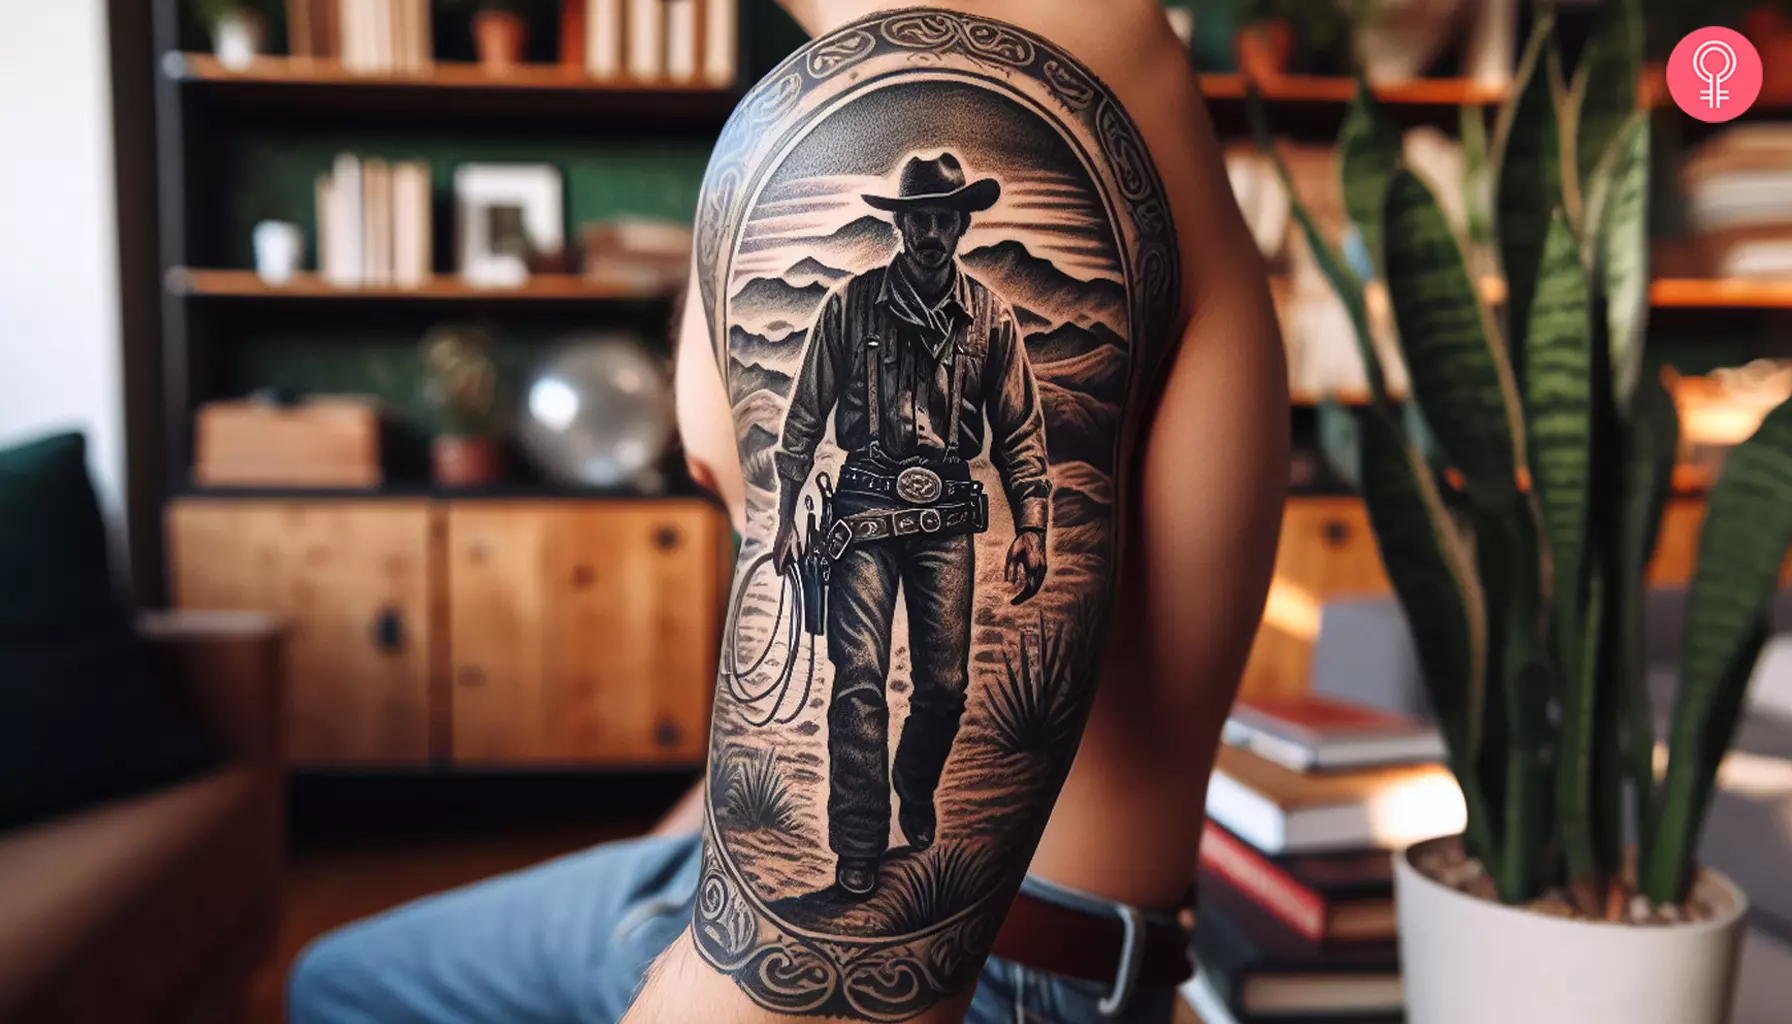 Western tattoo for men featuring a cowboy holding a whip